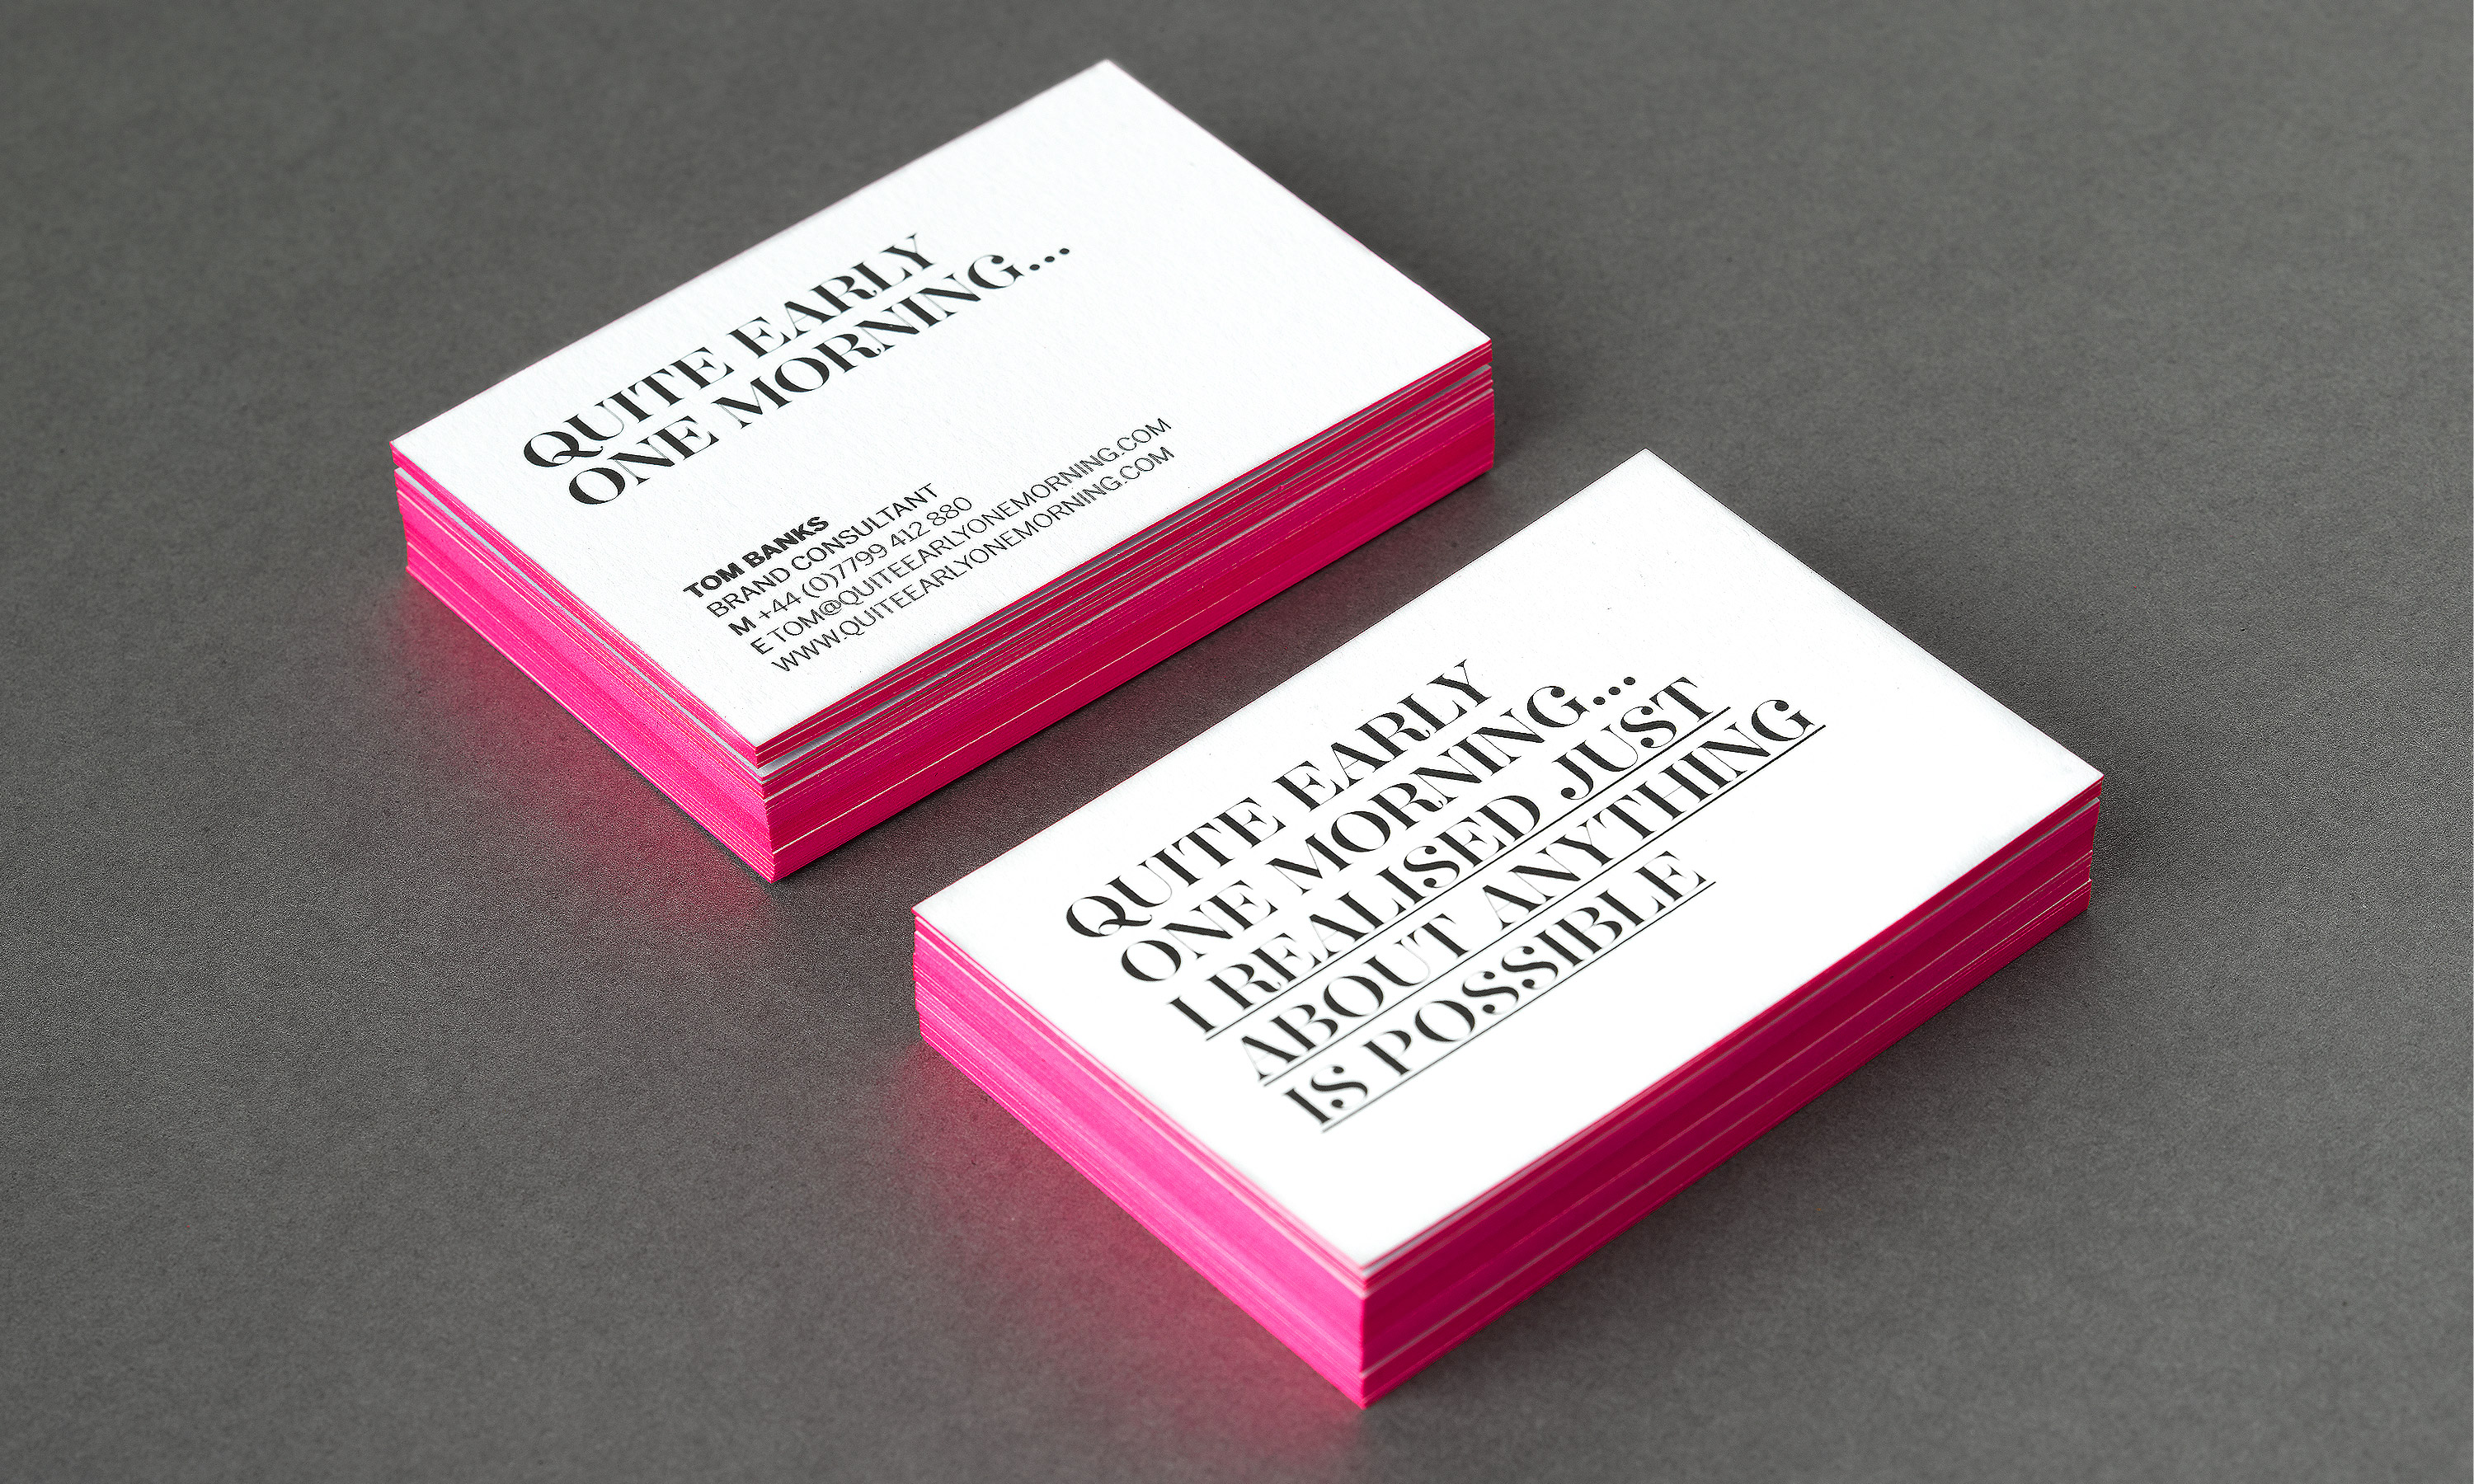 By Dana Robertson Creative Director and Founder of Neon. Quite Early One Morning set of business card detail of front and back of cards, with high finish pink edging – demonstrating the breath of the language idea of adding relevant and witty copy to the company name. Part of the naming and identity project for Quite Early One Morning – Idea, art direction and design by Neon Design & Branding Consultancy www.neon-creative.com